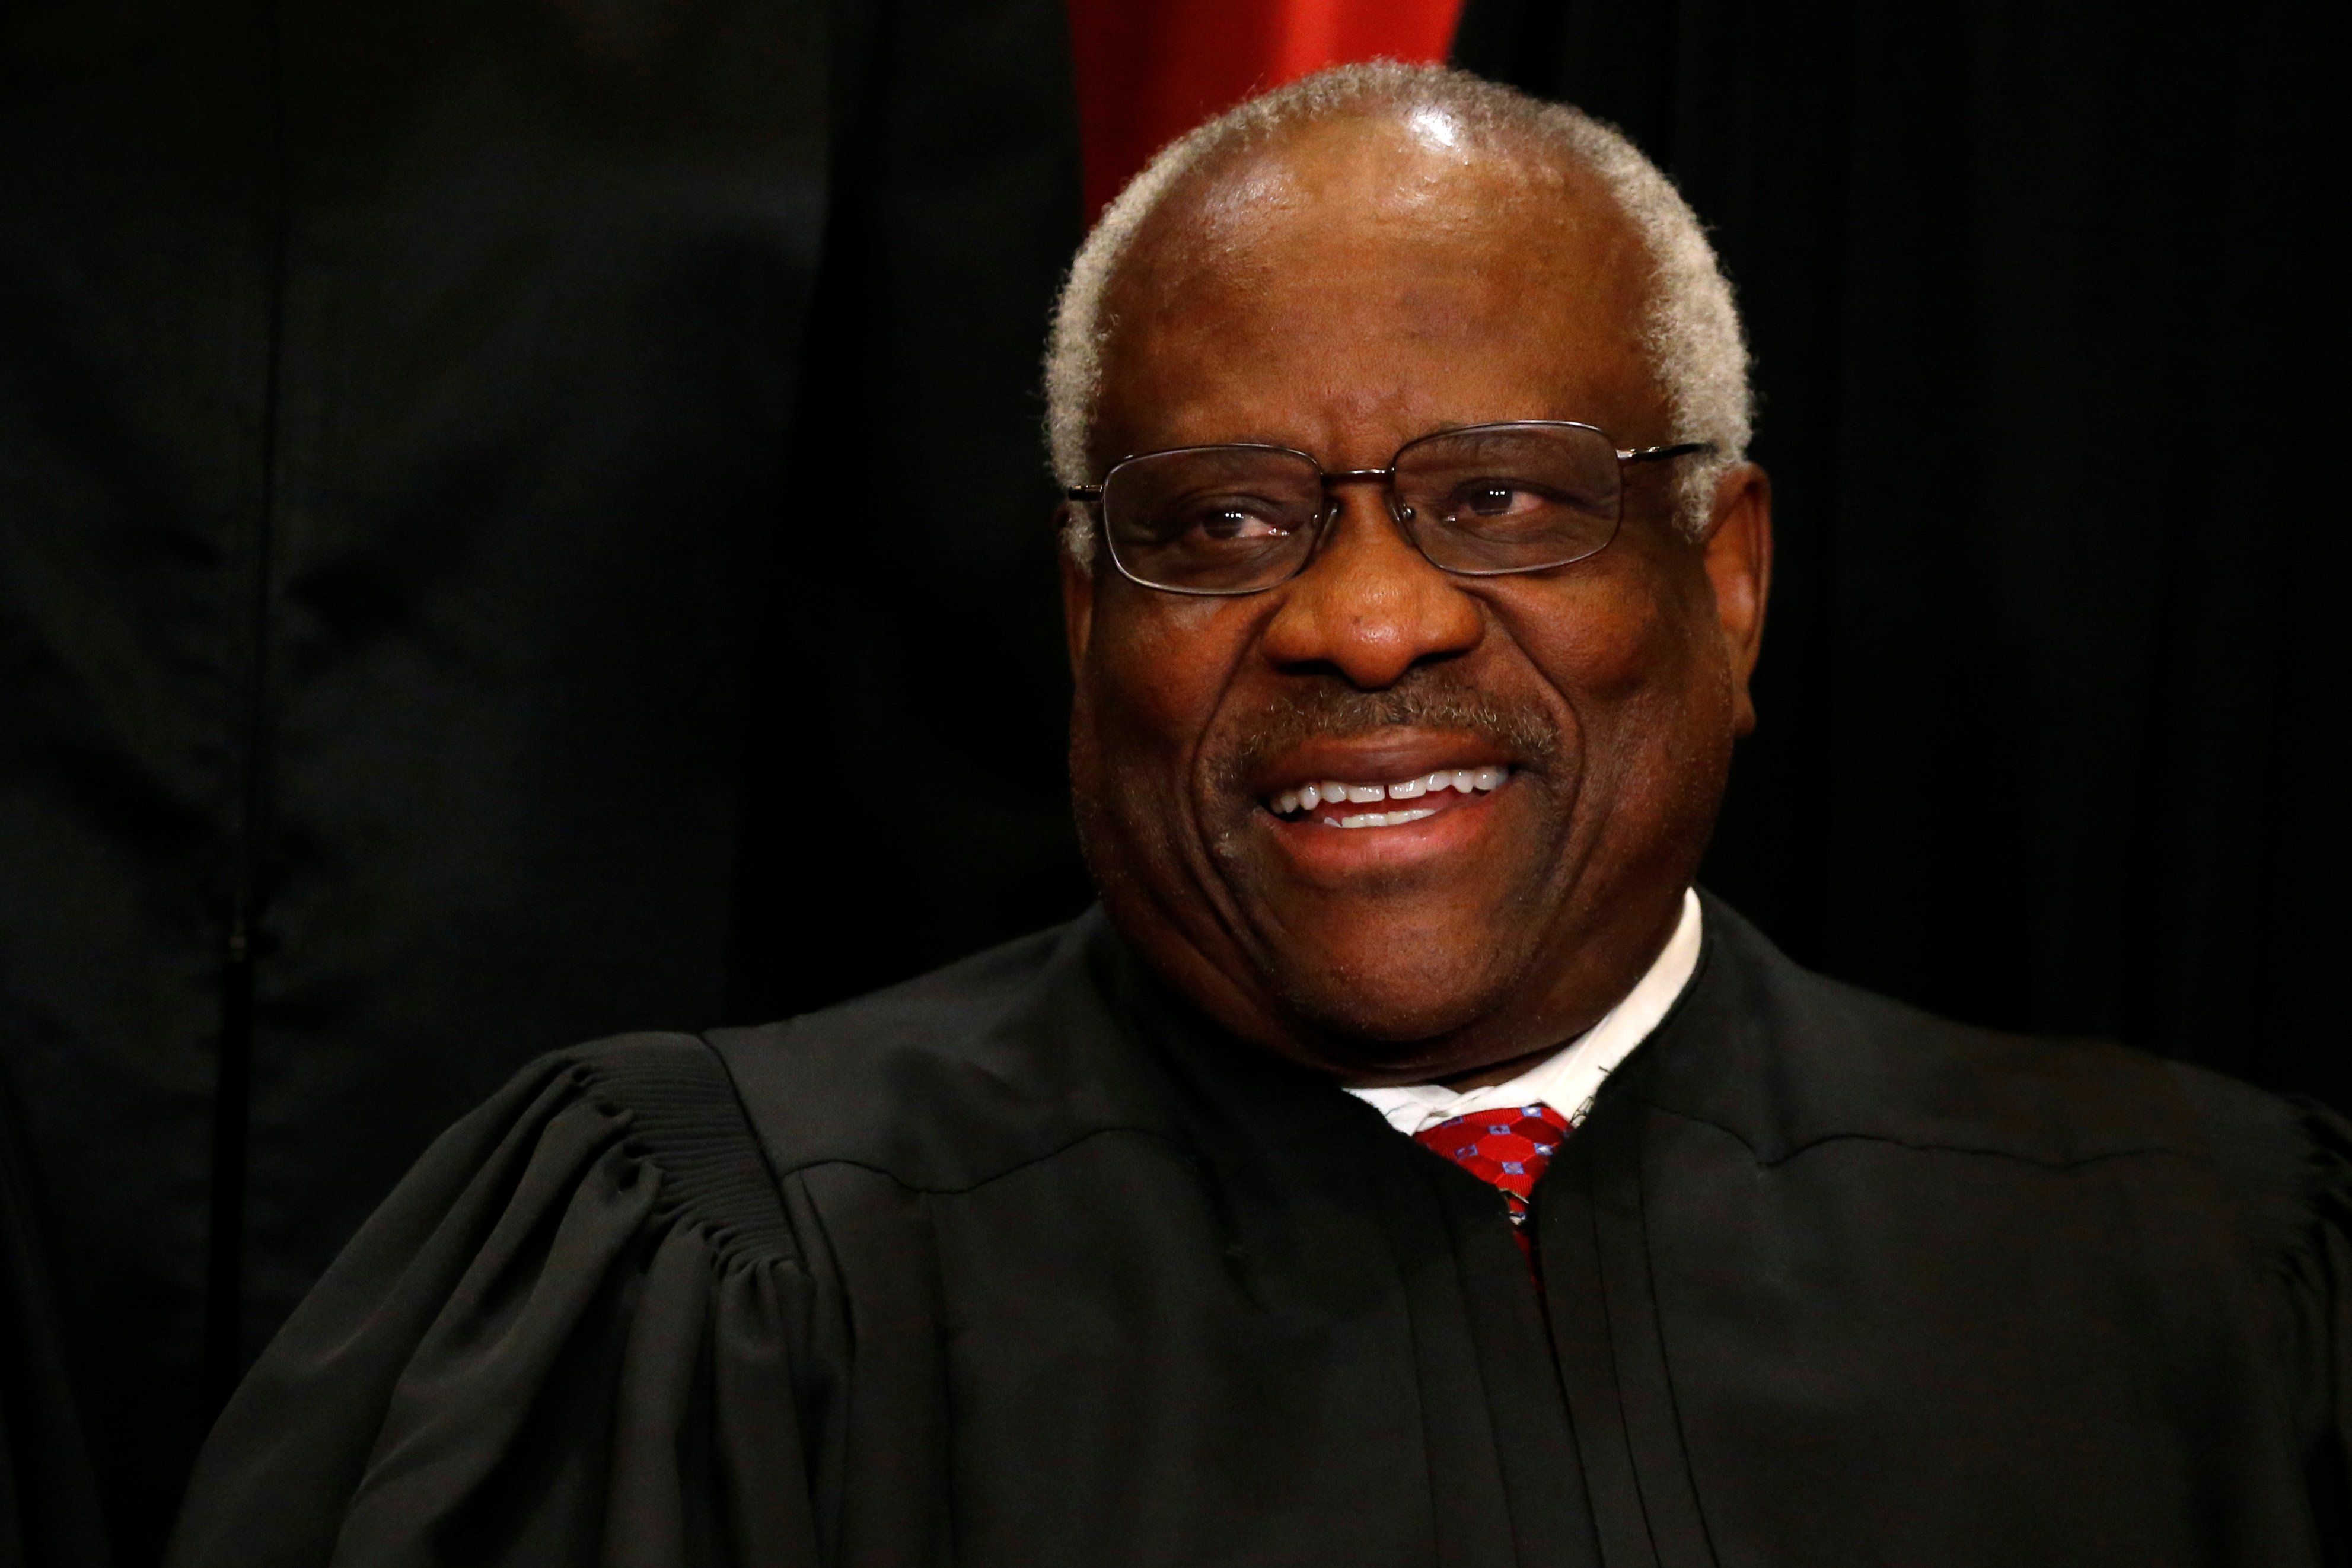 Justice Clarence Thomas participates in taking a new family photo with his fellow justices at the Supreme Court building in Washington, D.C. REUTERS/Jonathan Ernst